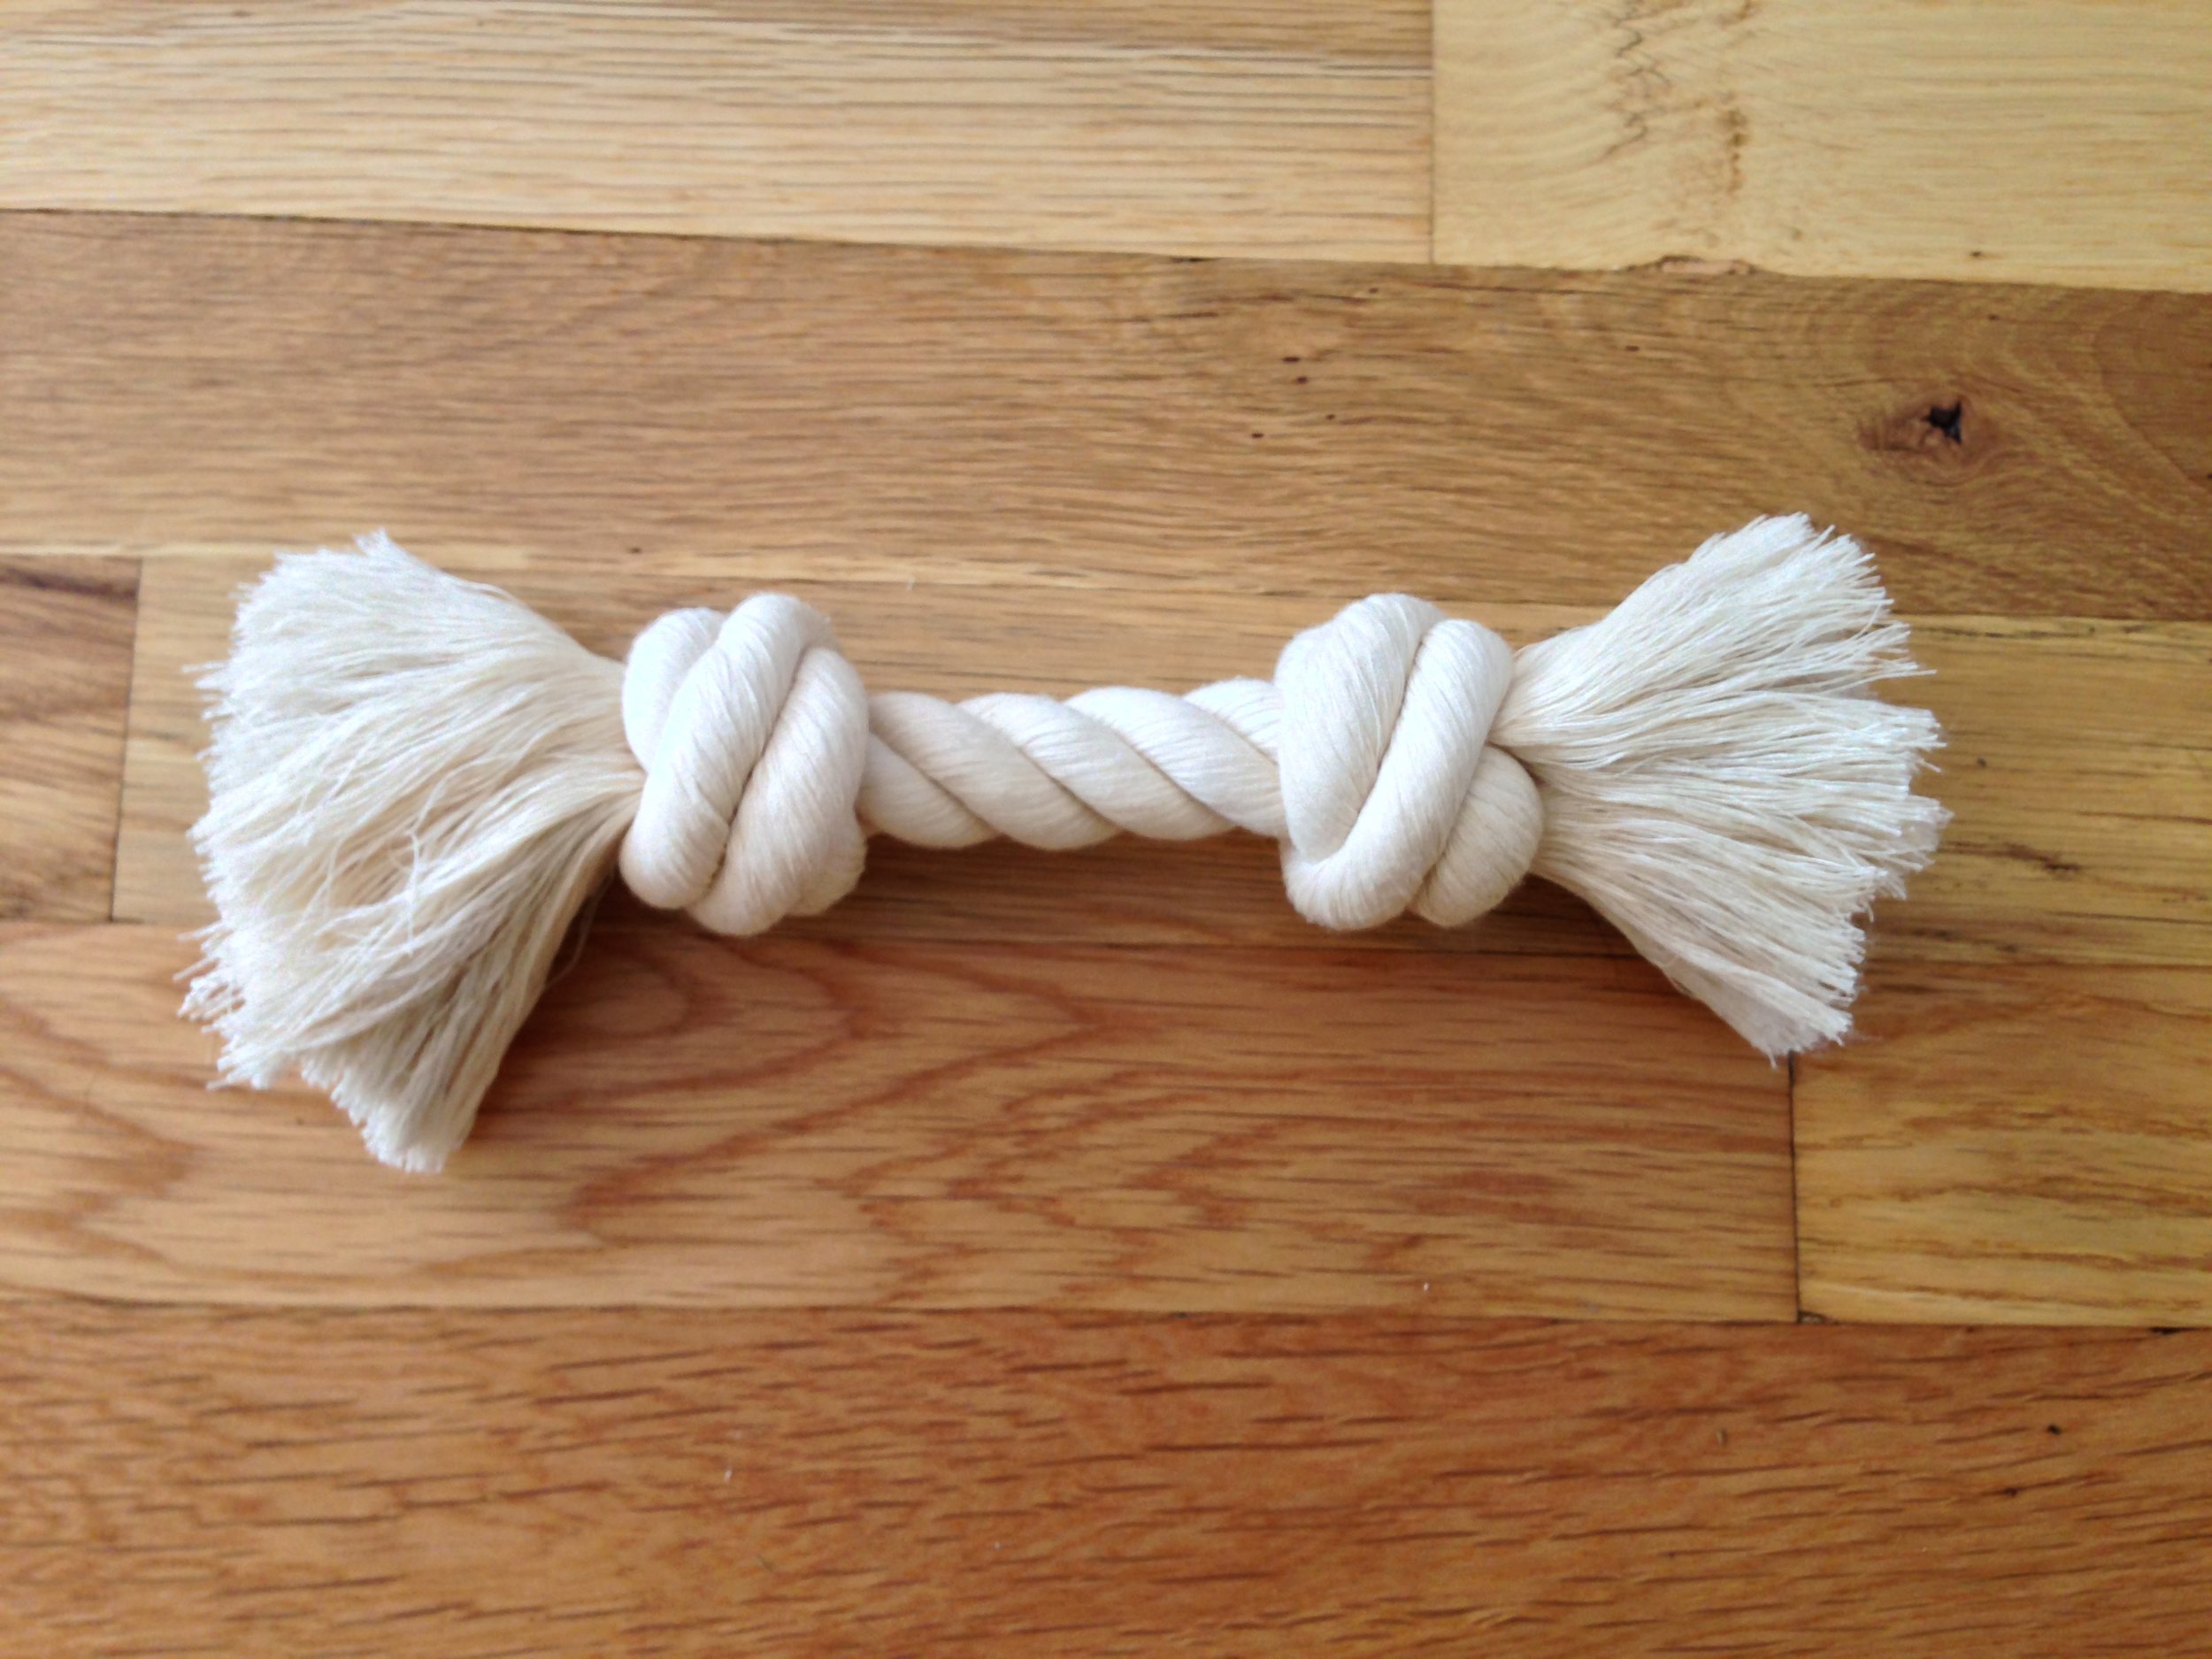 Simple Rope Dog Toy Allwine Designs